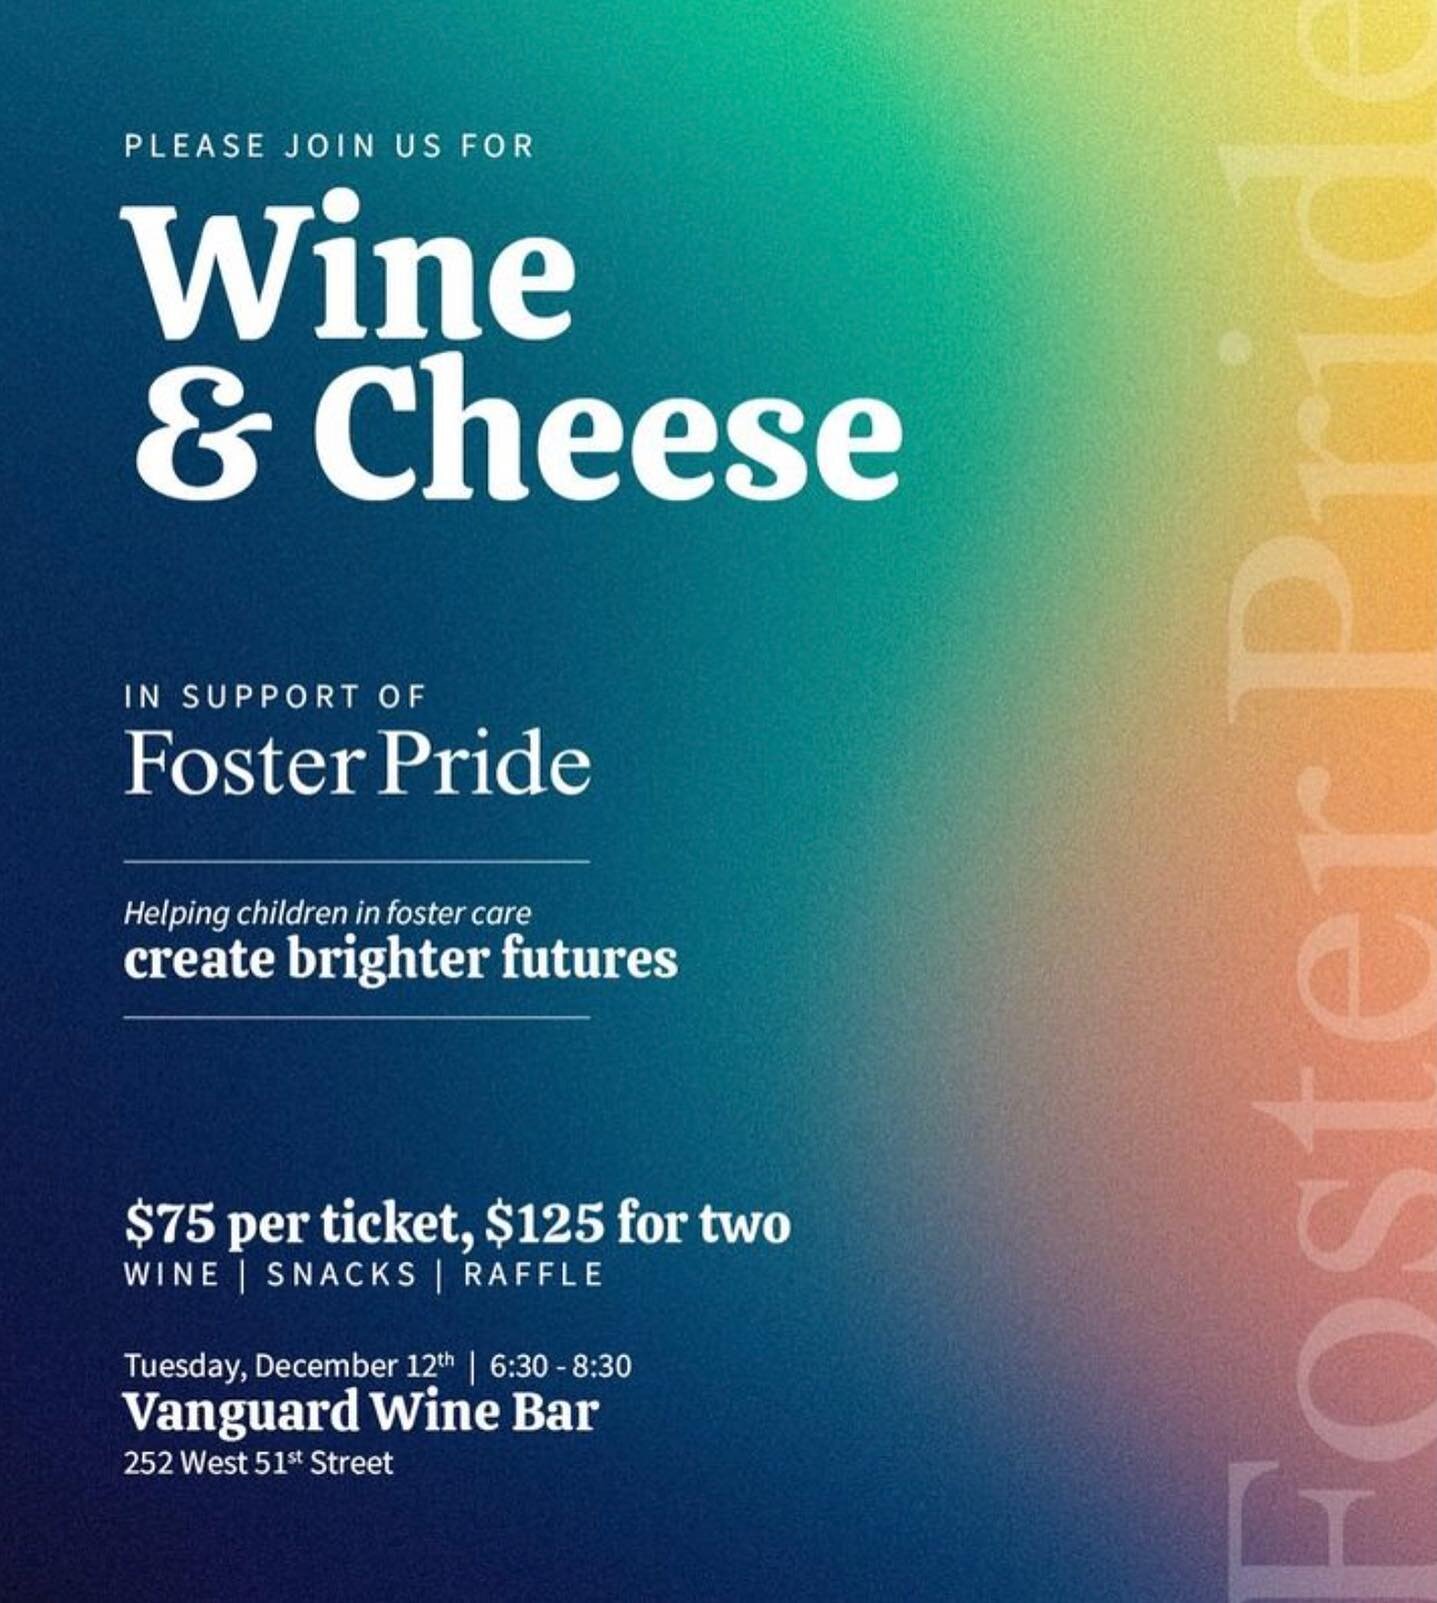 The Foster Pride Young Professionals Board invites you to join us for a night of Wine &amp; Cheese in support of Foster Pride!

Tuesday, December 12th |  6:30 - 8:30 pm
Vanguard Wine Bar
252 West 51st Street
New York City

Wine | Snacks | Raffle

Lin